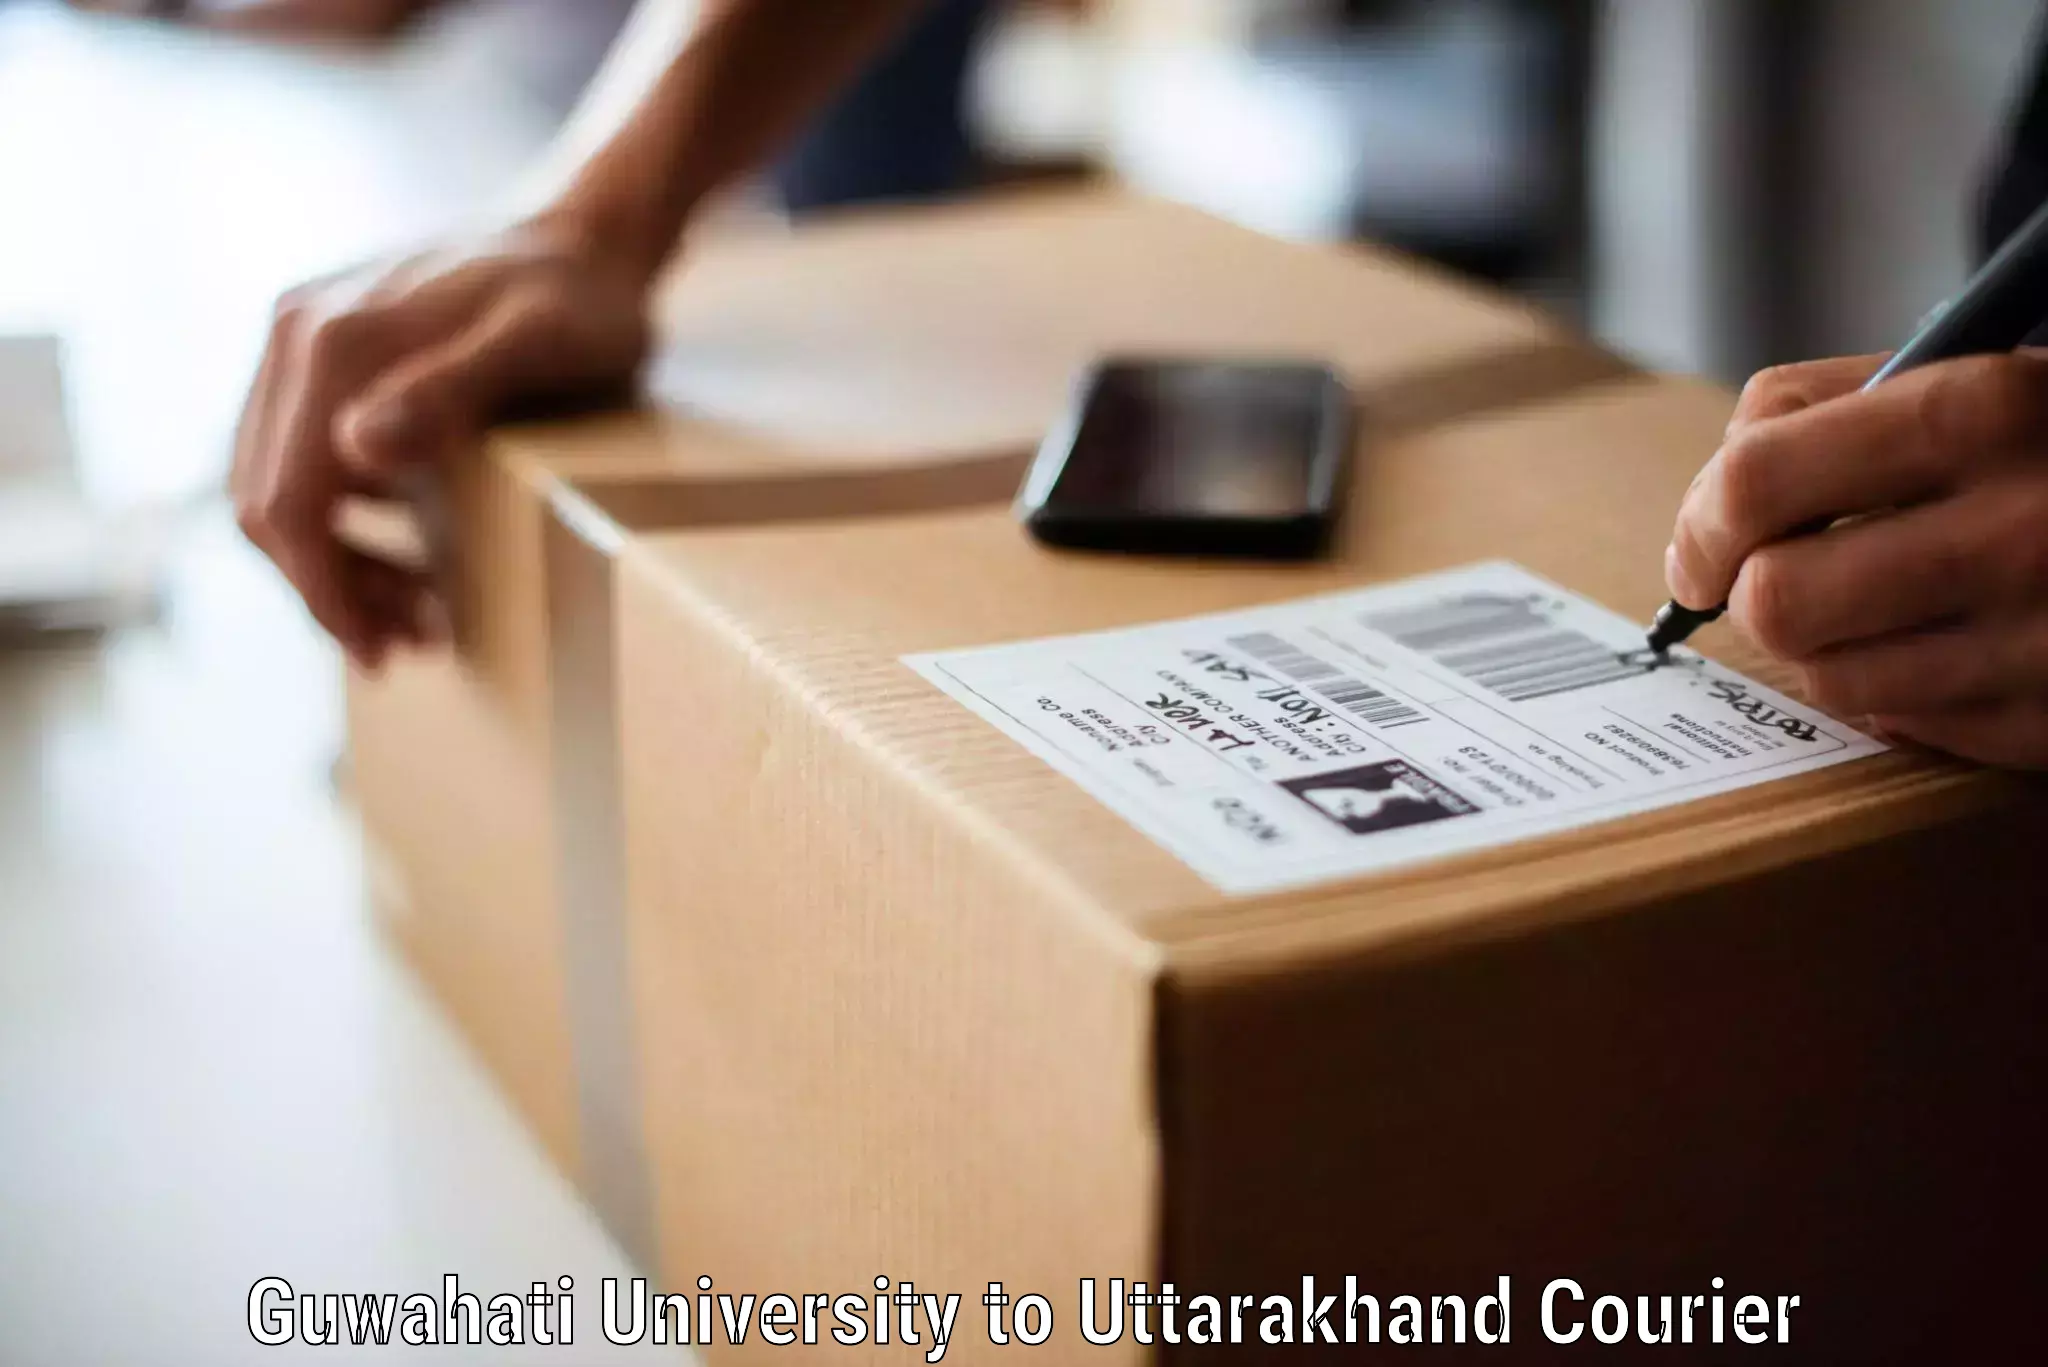 Moving and handling services in Guwahati University to Tehri Garhwal